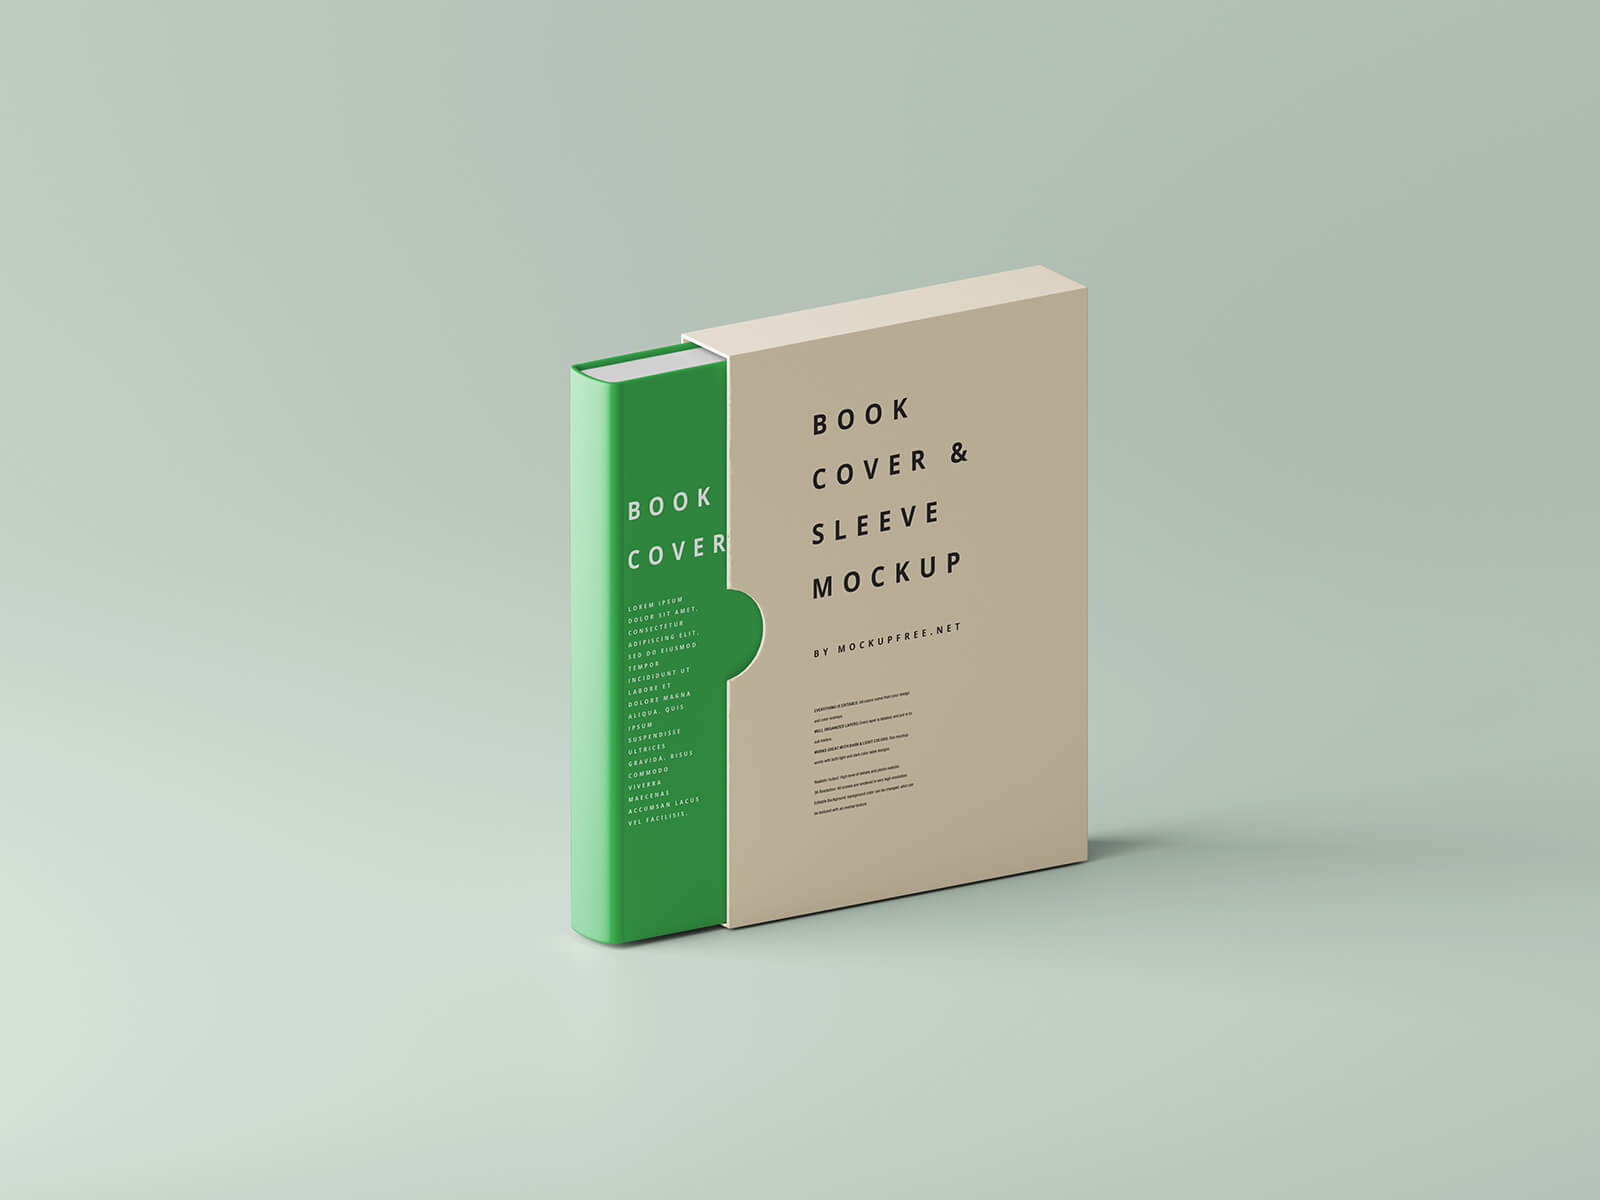 Free Hard Cover Book Cover & Sleeve Mockup PSD